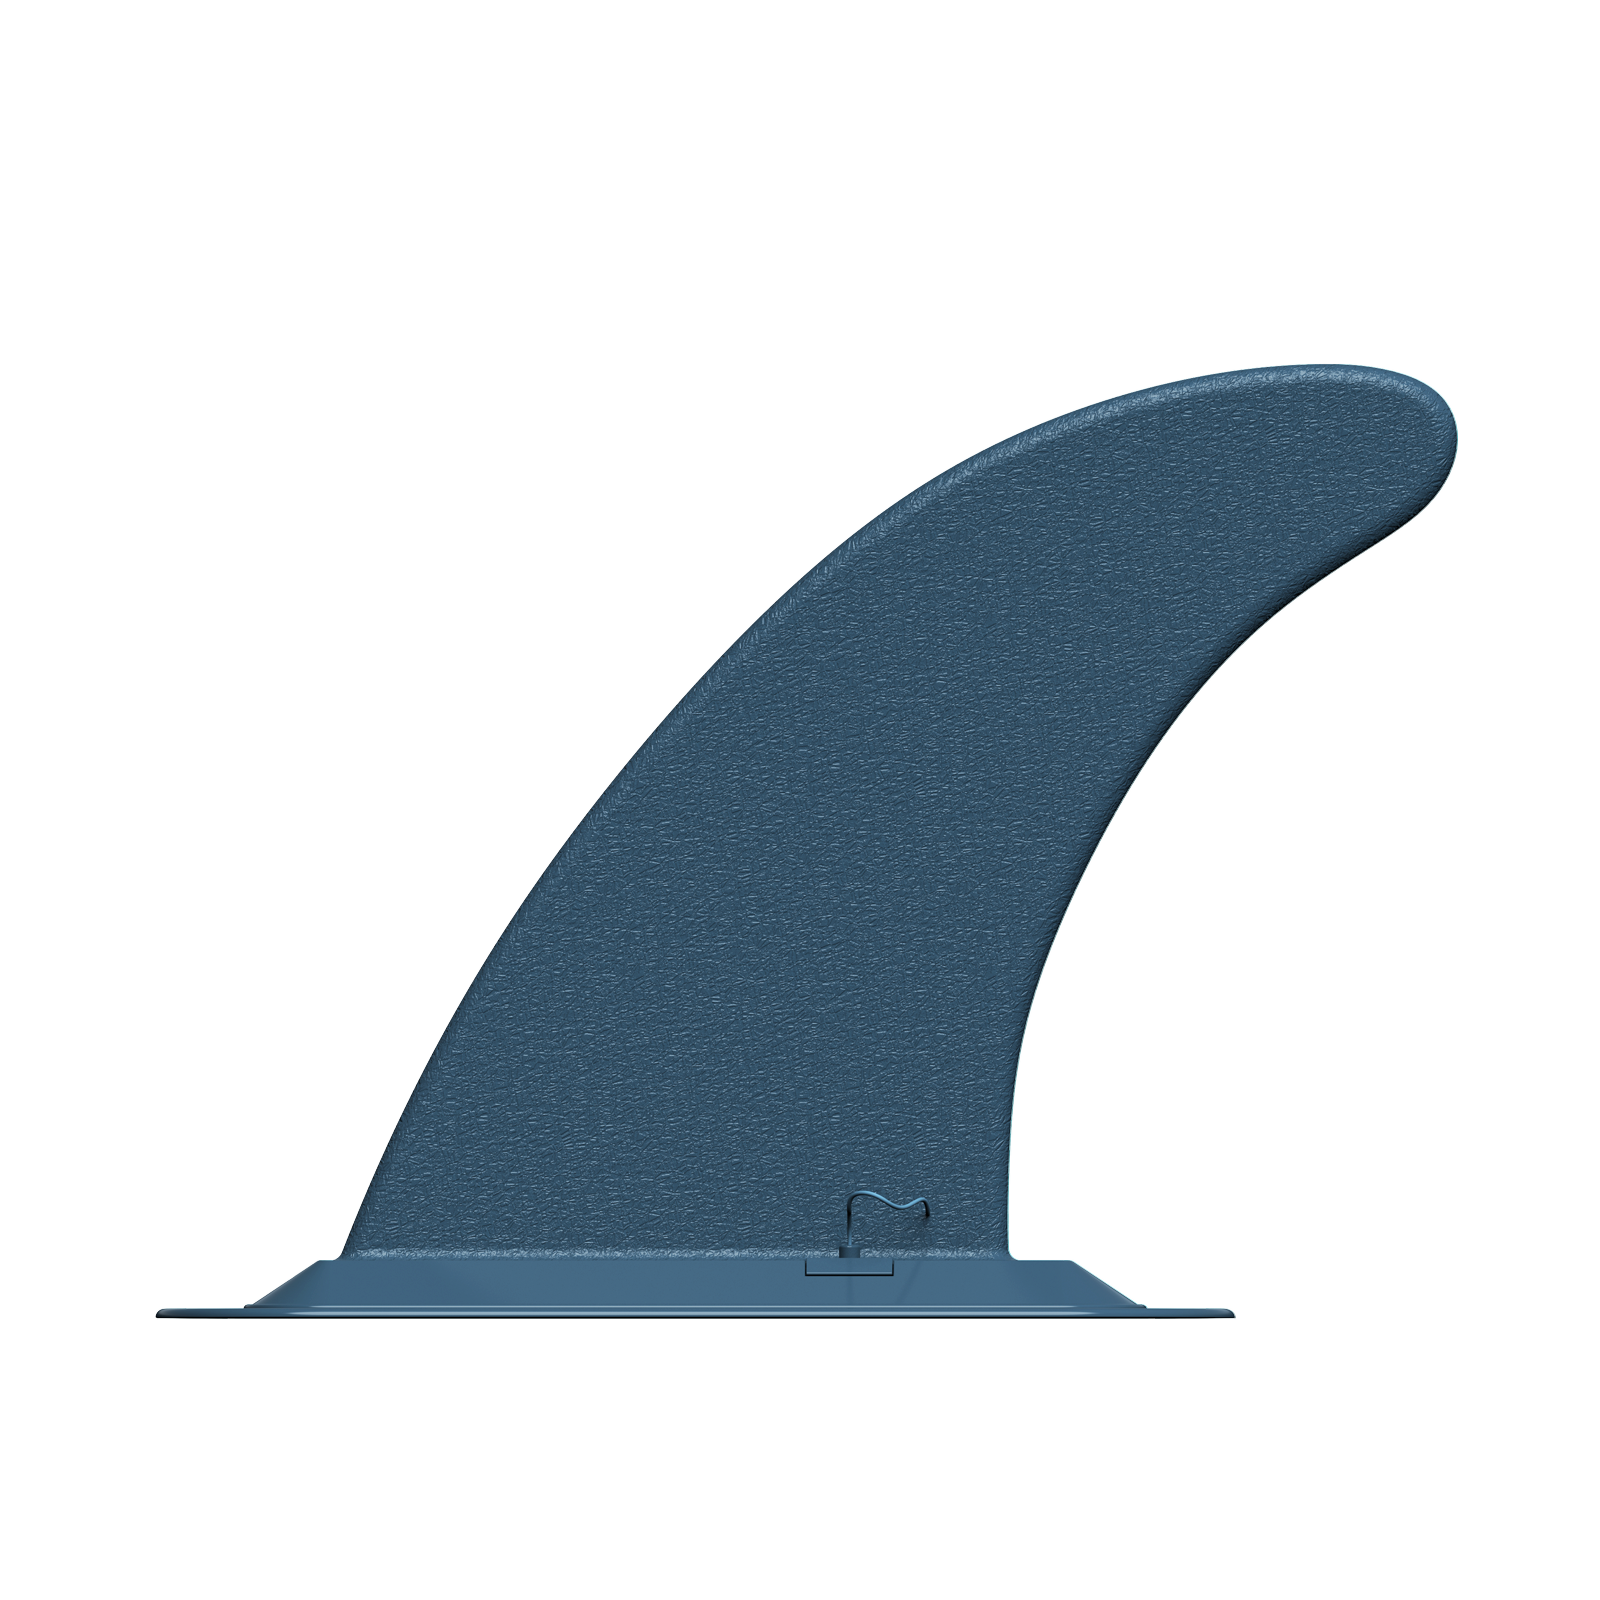 Wave SUP Fin | Detachable Fin in Navy for Tourer, Cruiser, Woody Paddle Boards - Wave Spas Inflatable, foam Hot Tubs